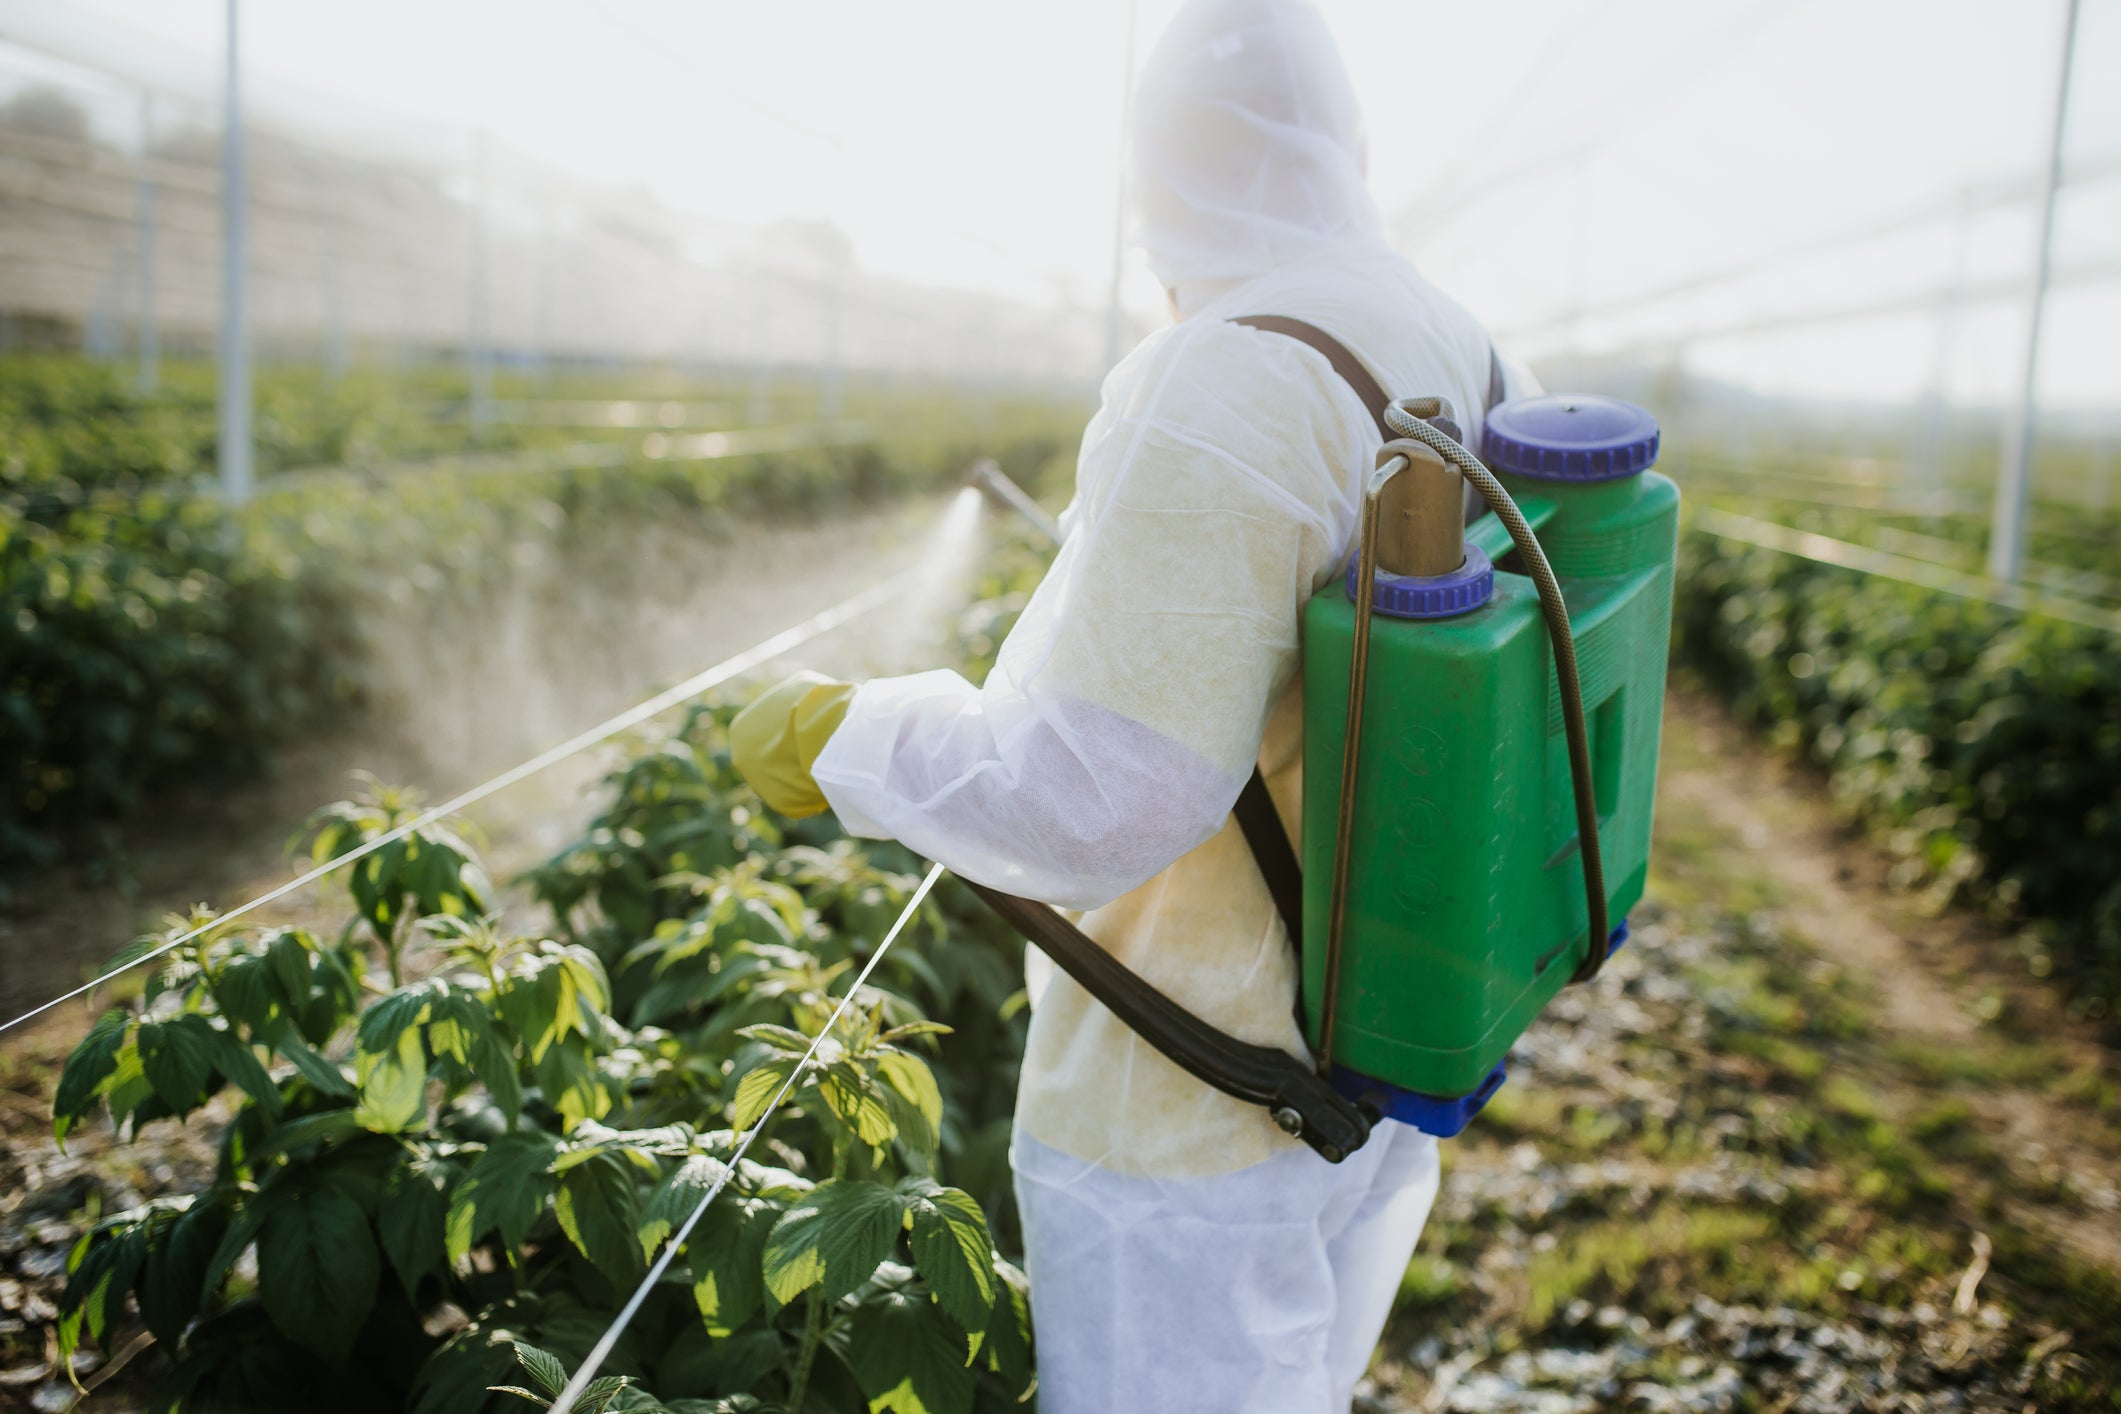 The report calls for US pesticides to be permitted